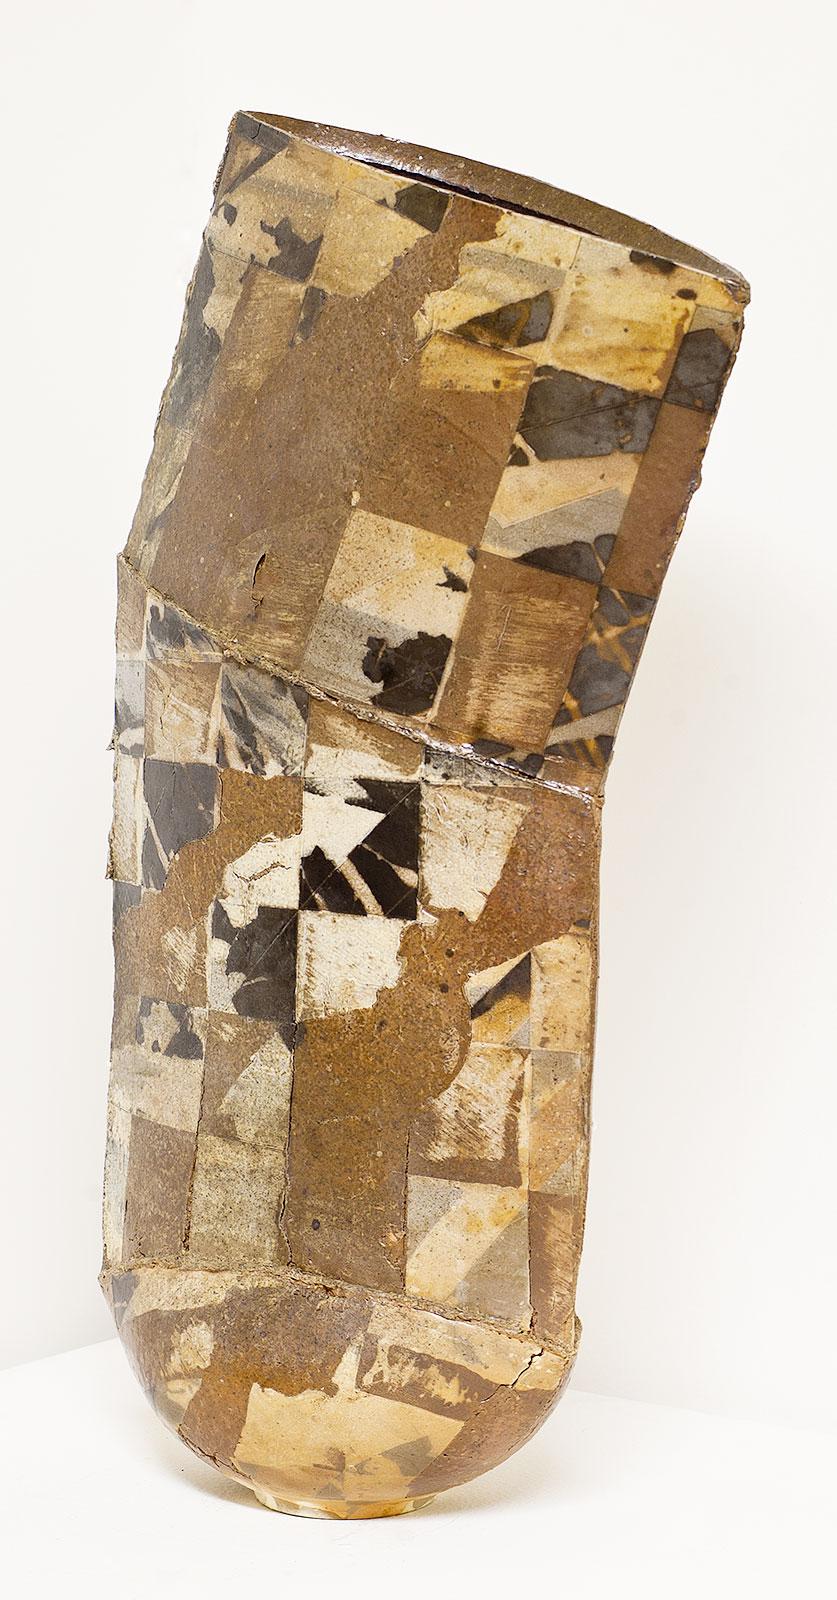 Untitled, 1996, Hendrik Schink, stoneware and glazes, 17.75 in. x 9.5 in. x 4.5 in. (45cm x 24cm x 11.4cm), 96.002.3. Gift of the artist.